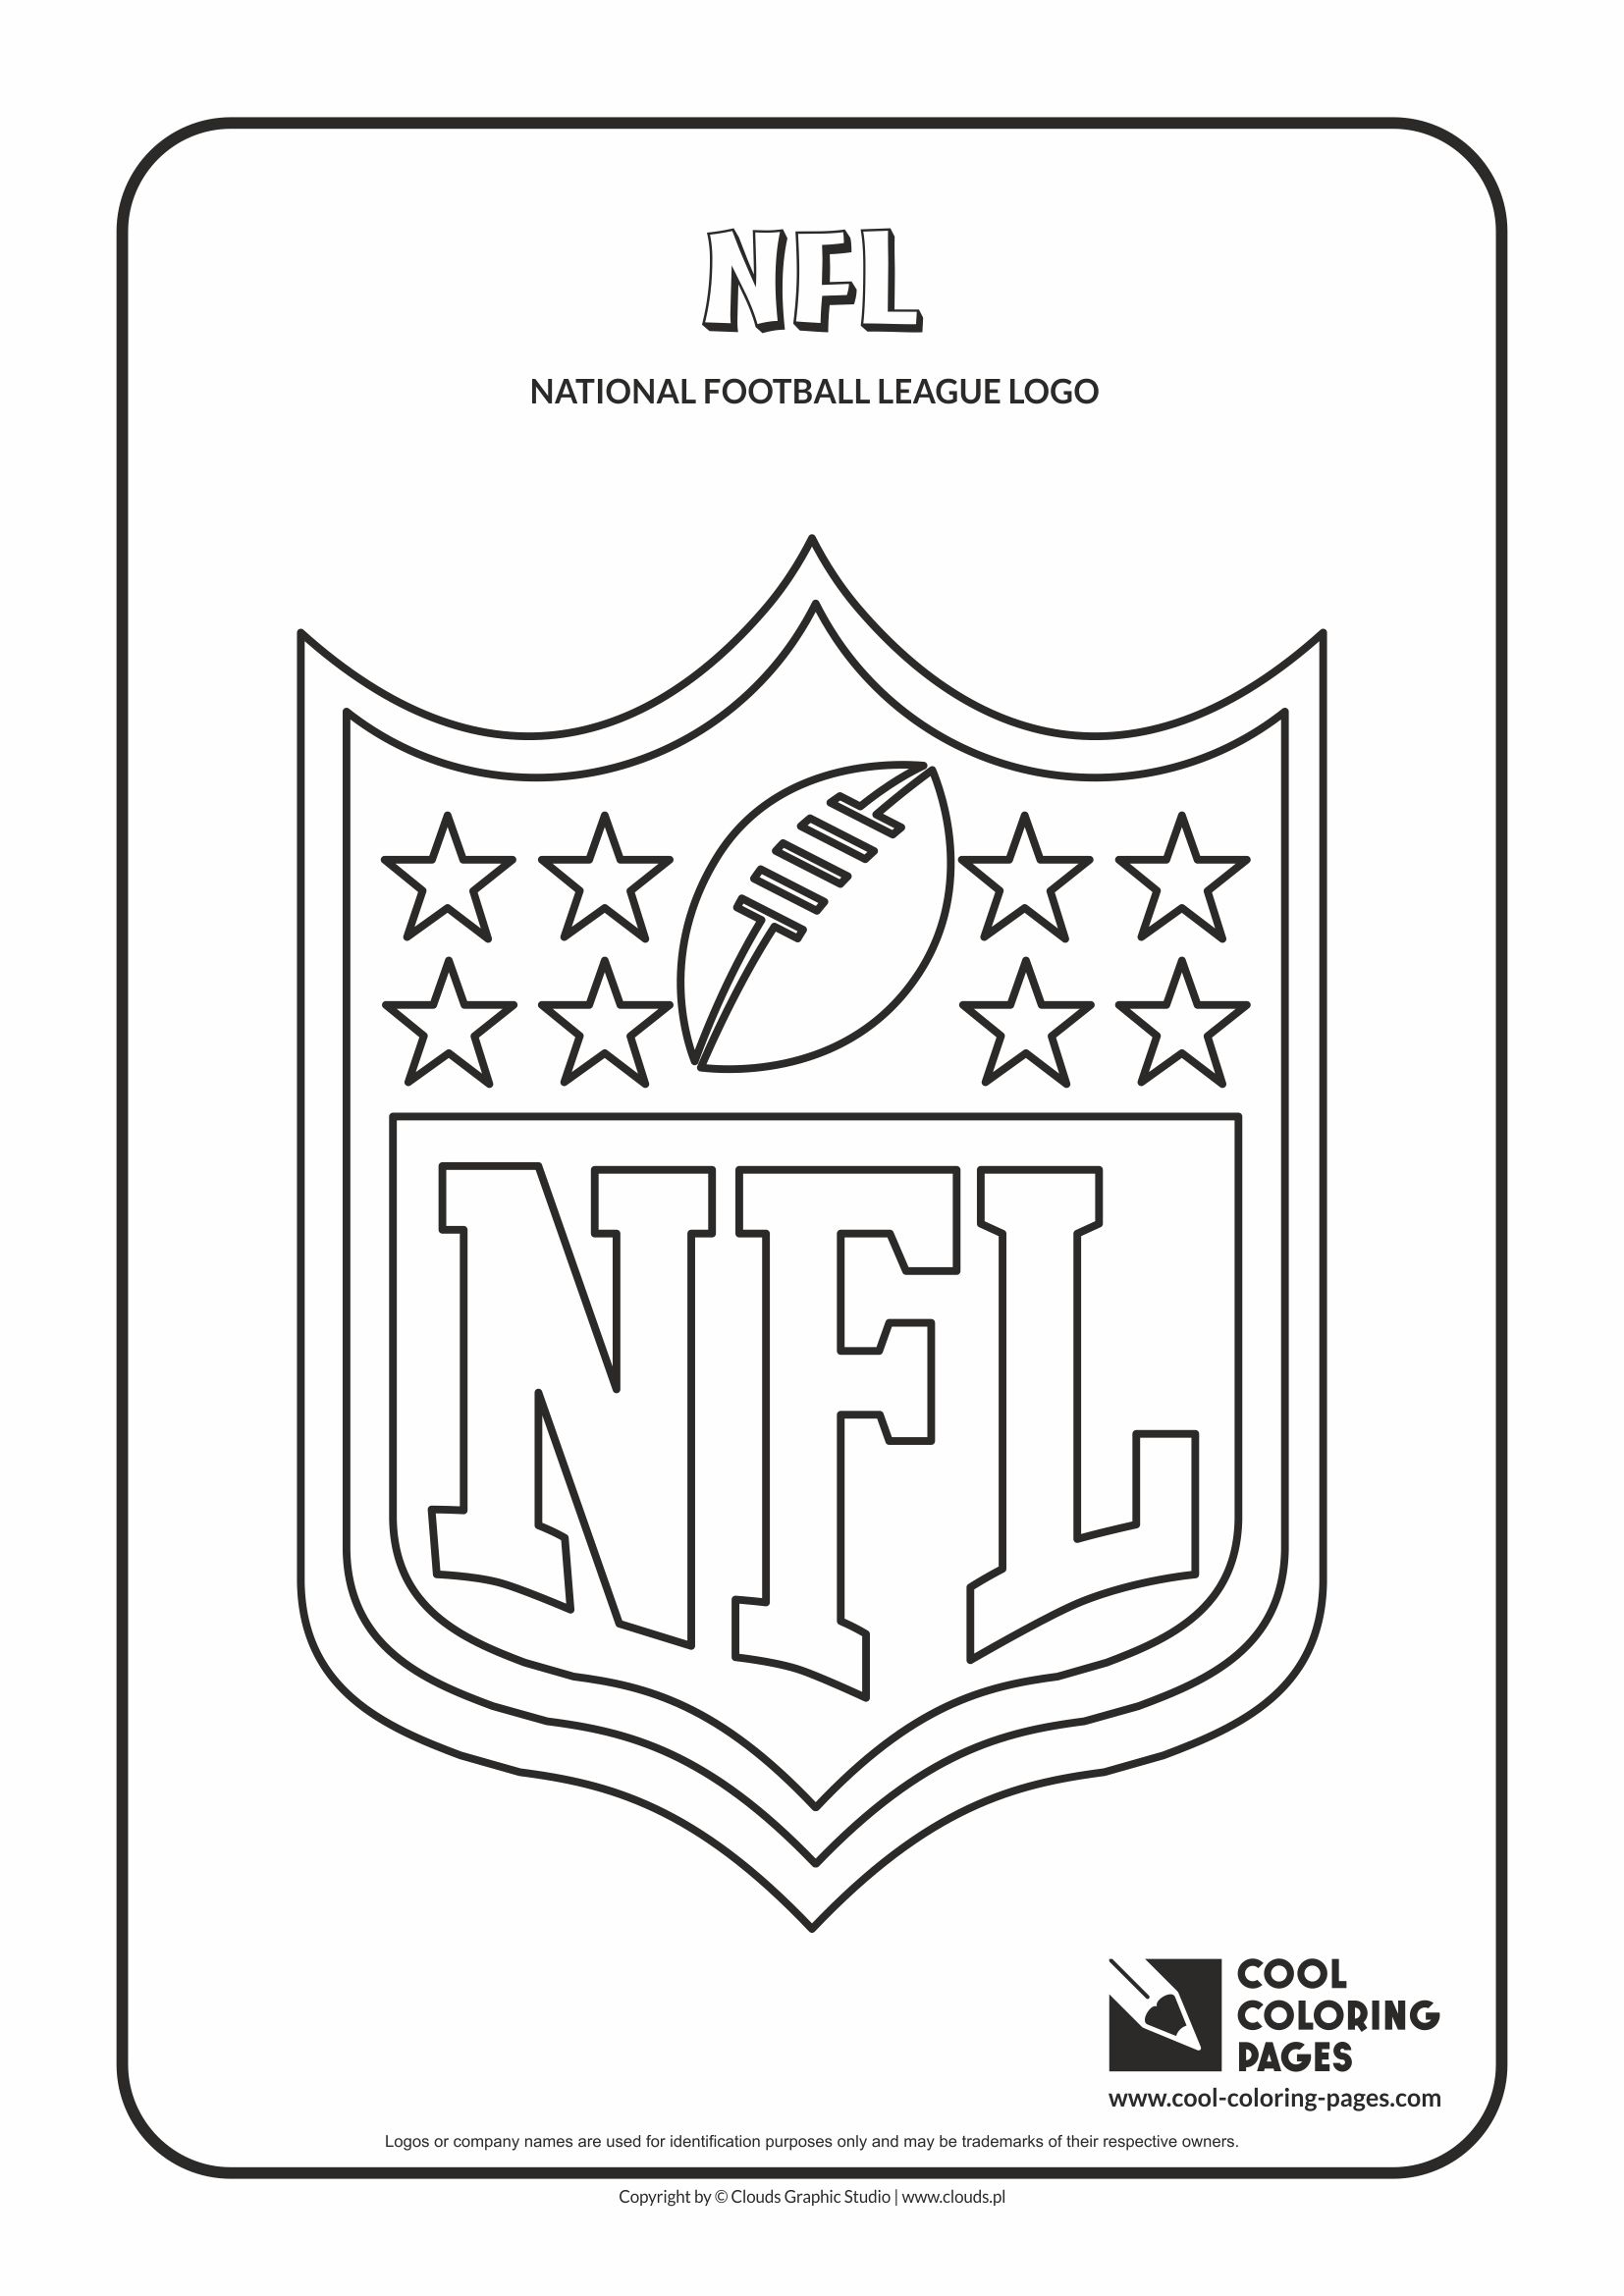 Cool Coloring Pages NFL teams logos coloring pages Cool